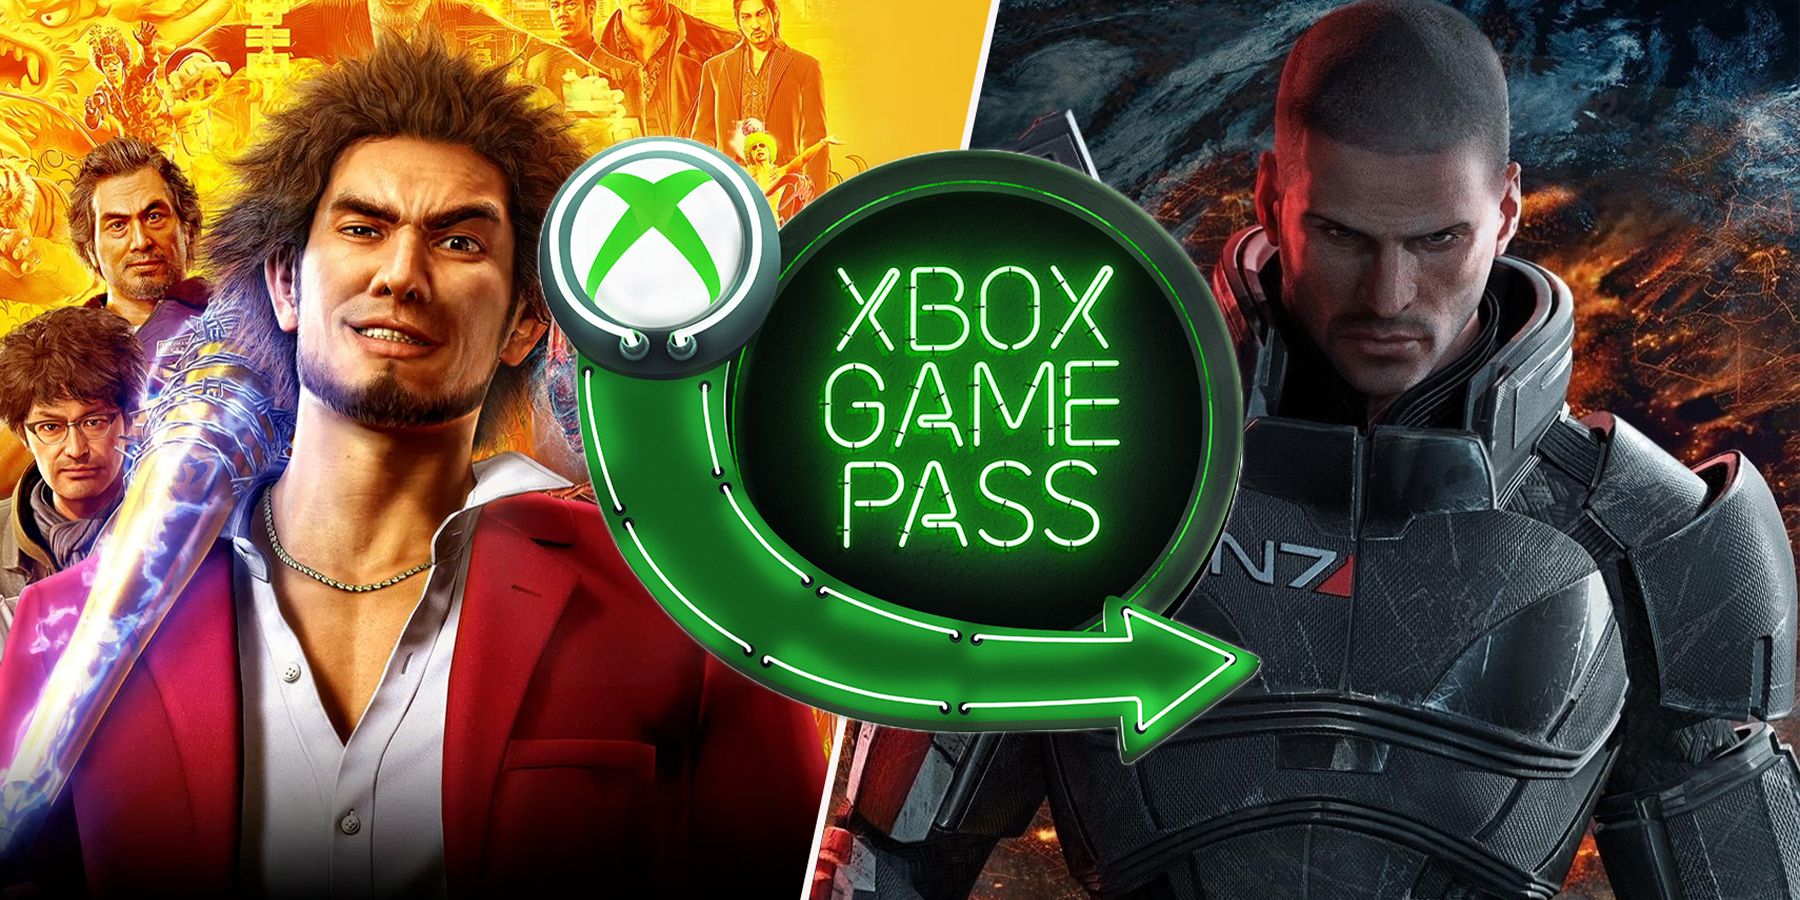 Best Simulation Games on Xbox Game Pass: Top Picks